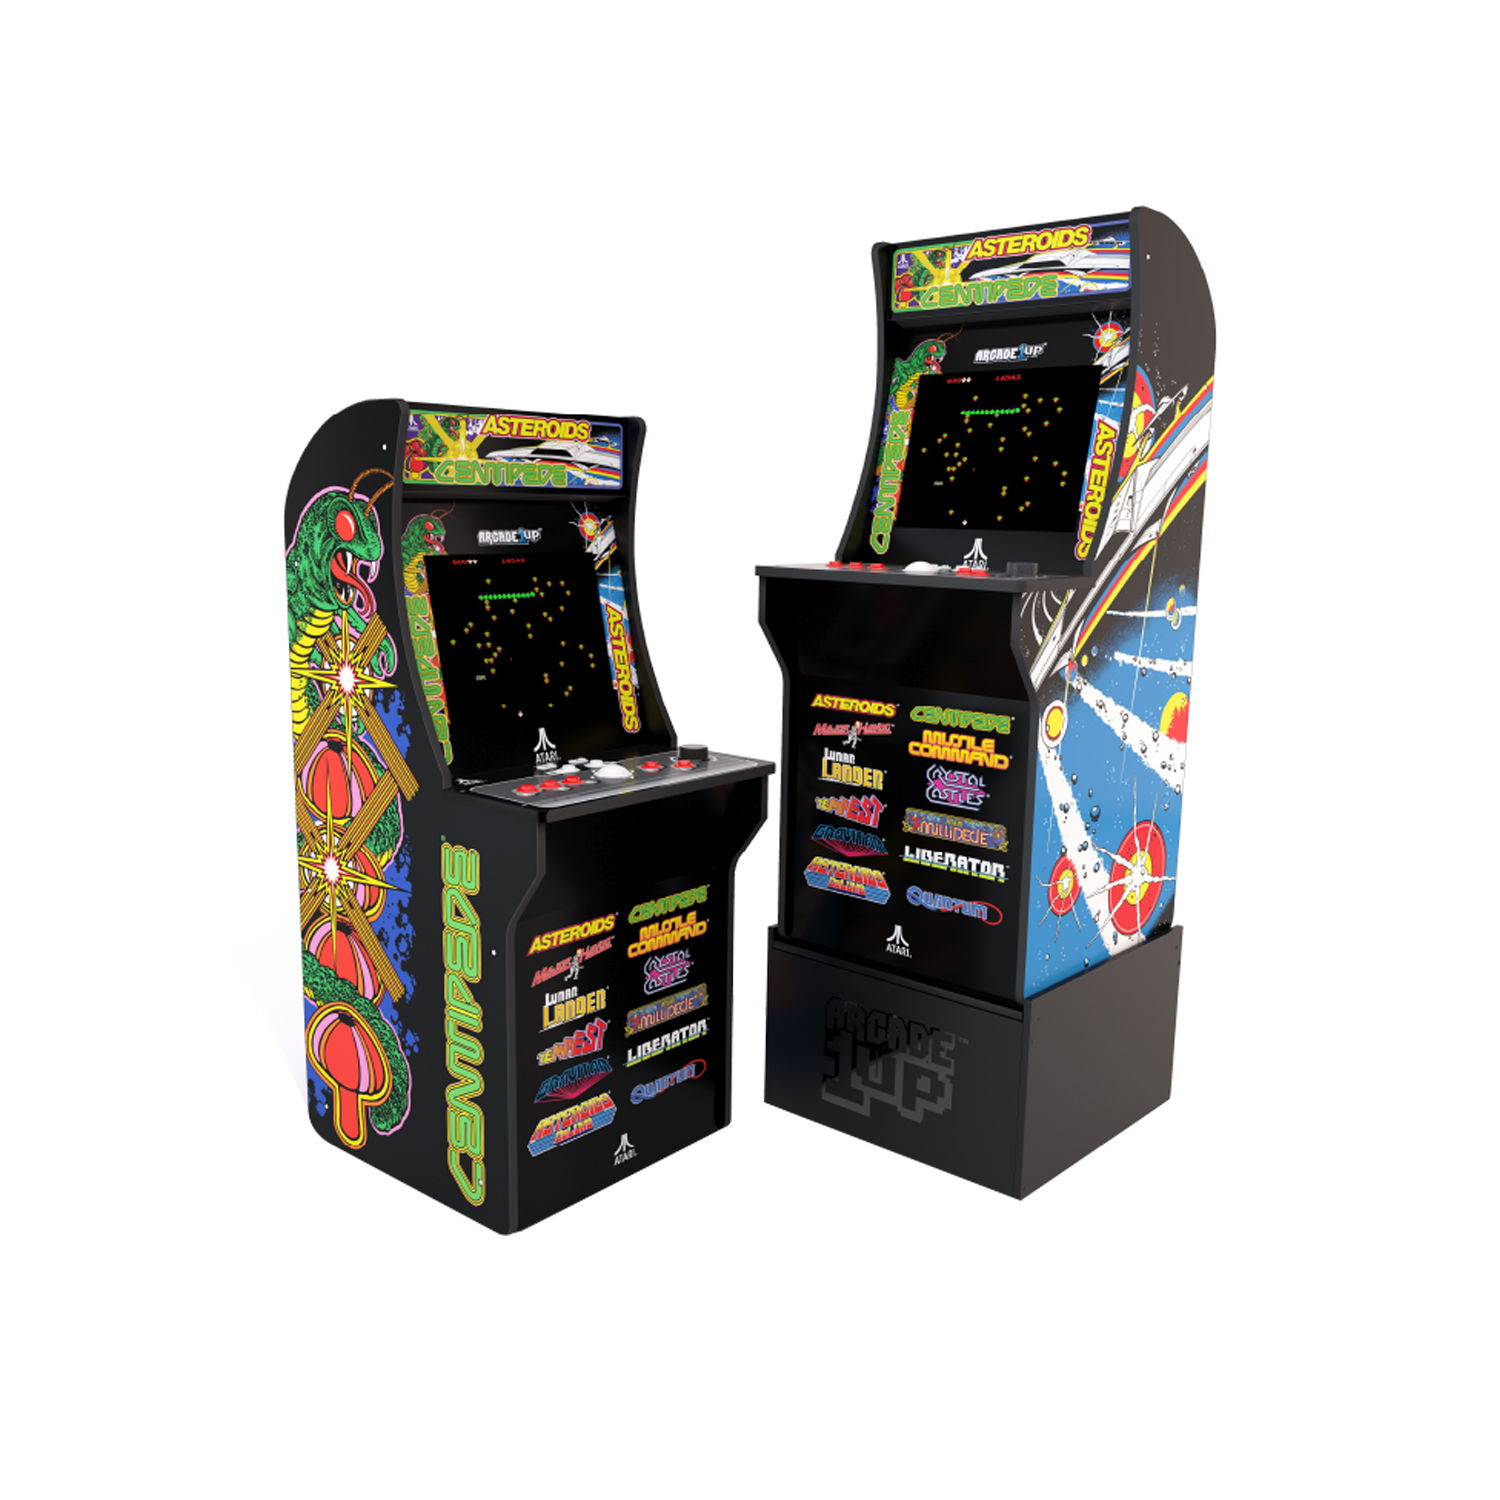 Deluxe 12-in-1 Arcade Machine with Riser, Arcade1UP, Atari Graphics - image 4 of 5